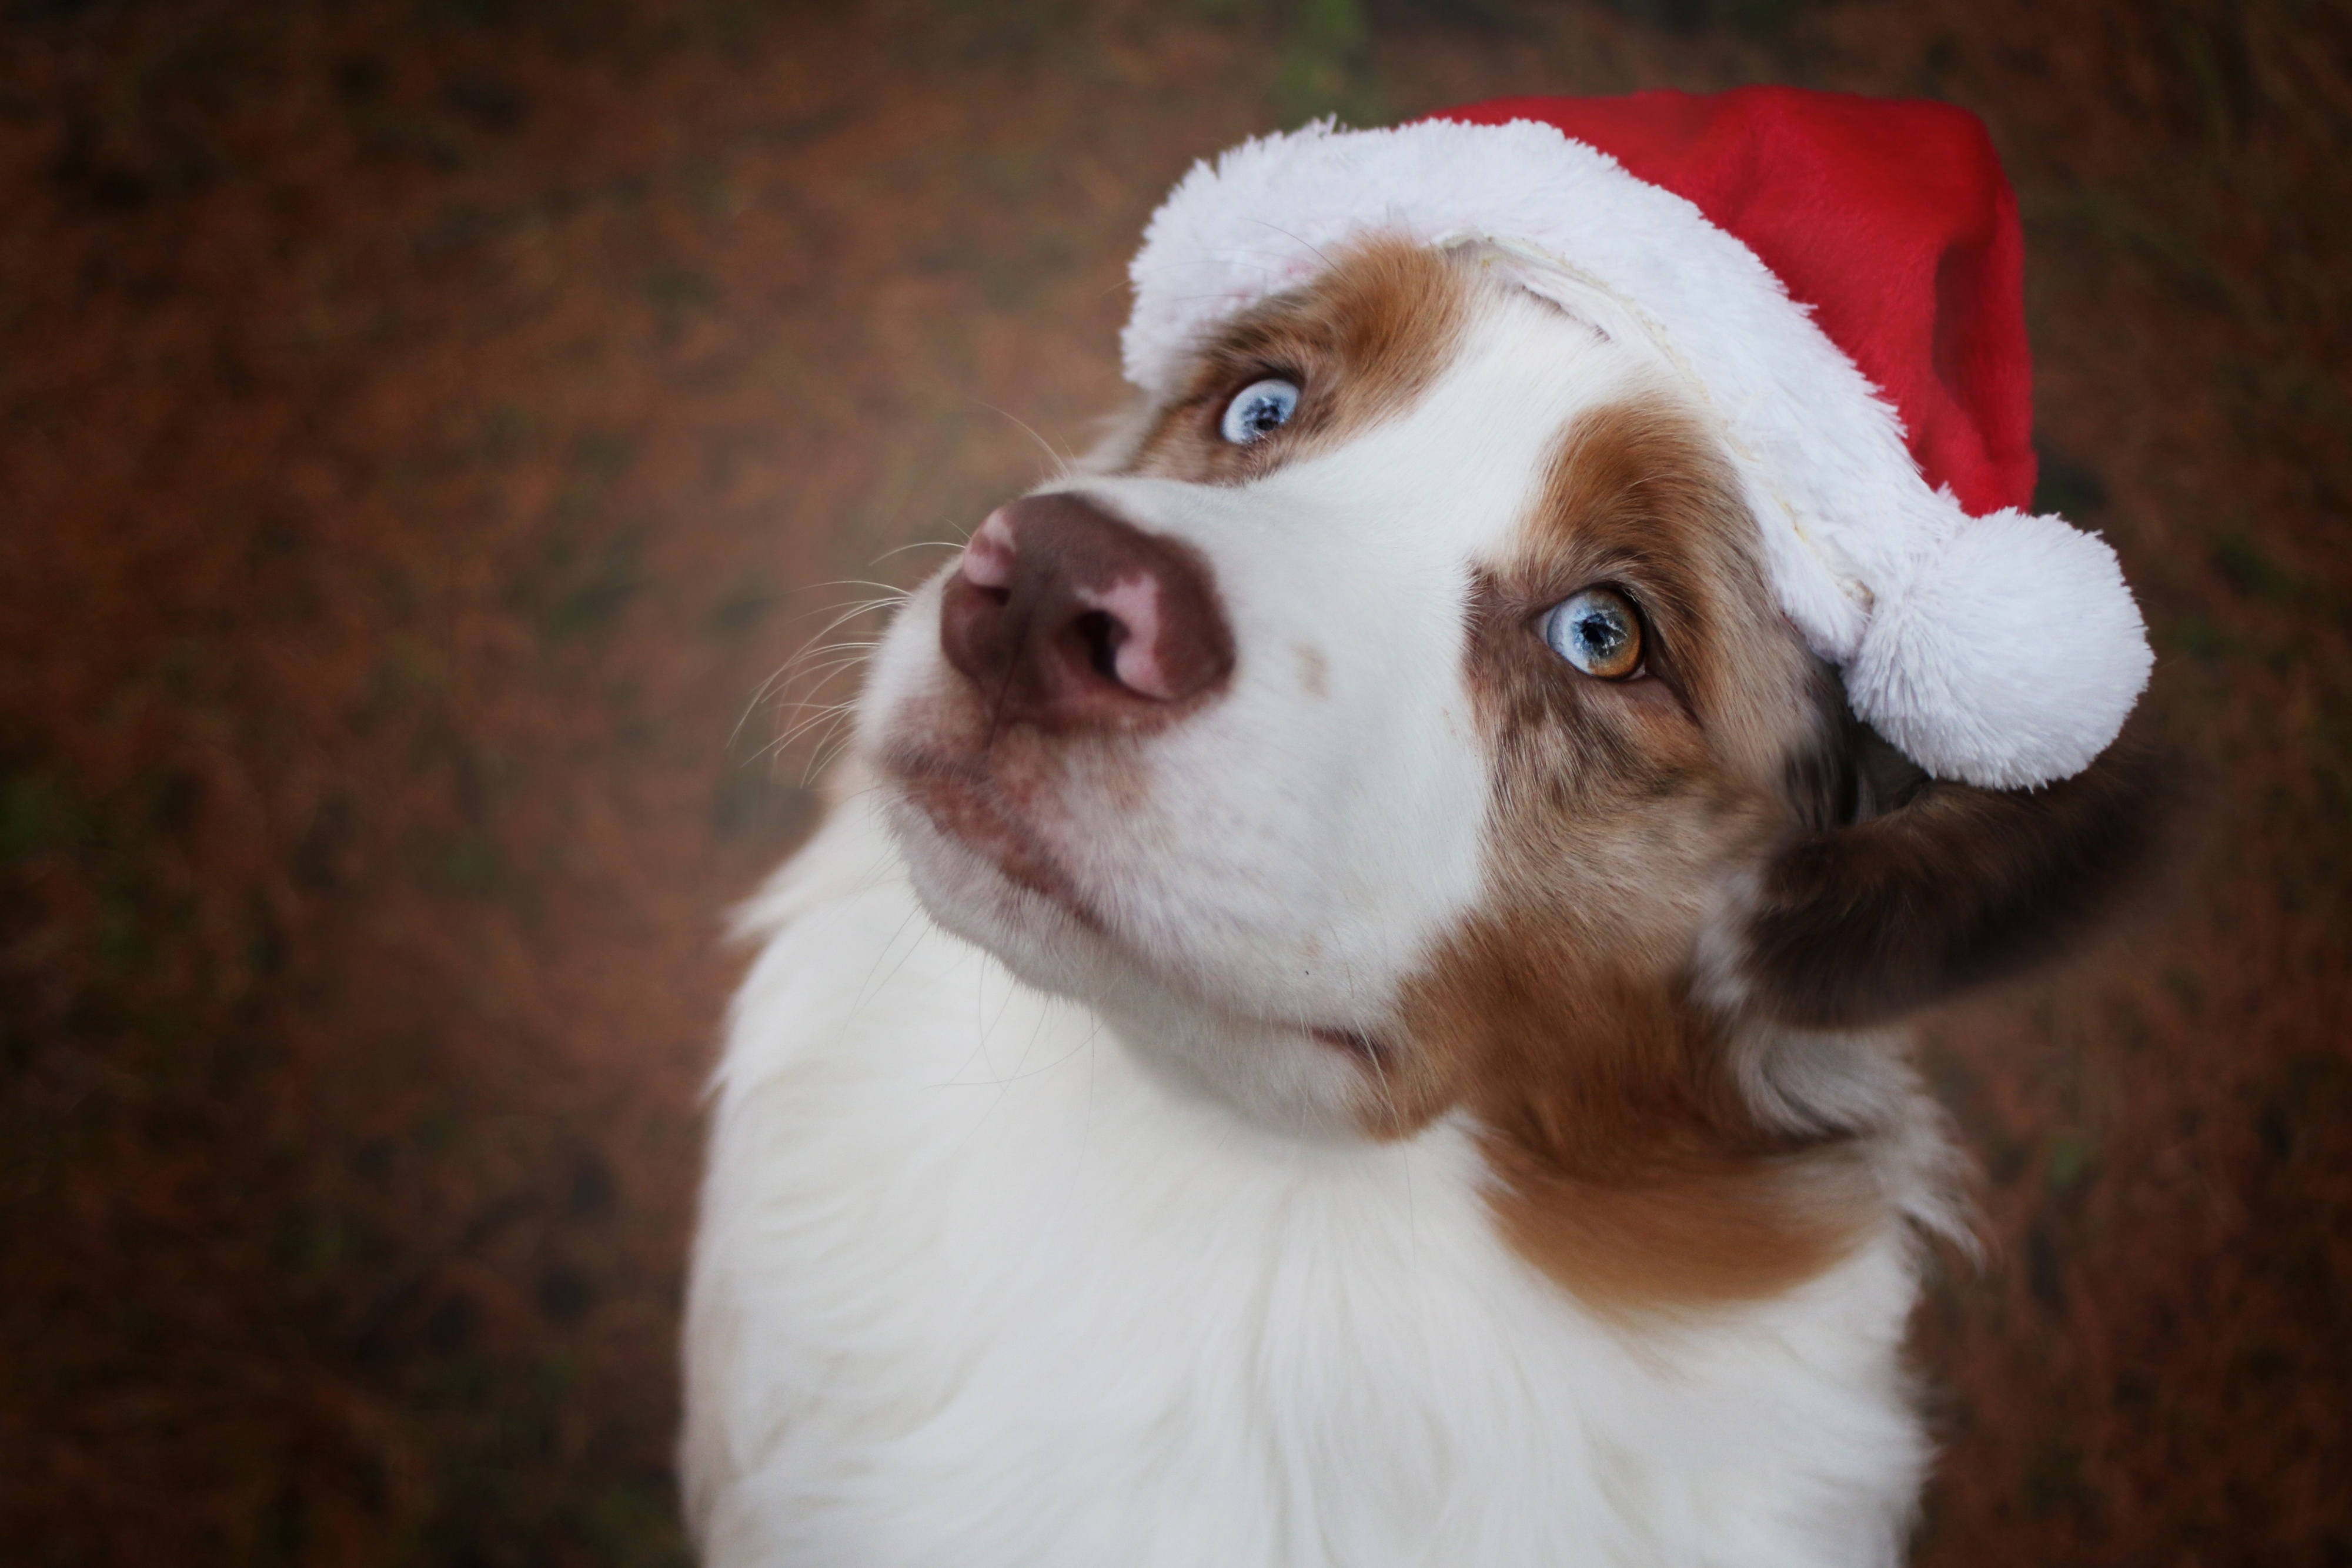 Australian Shepherd Dog with Santa Hat Wallpaper, HD Animals 4K Wallpapers, Images and